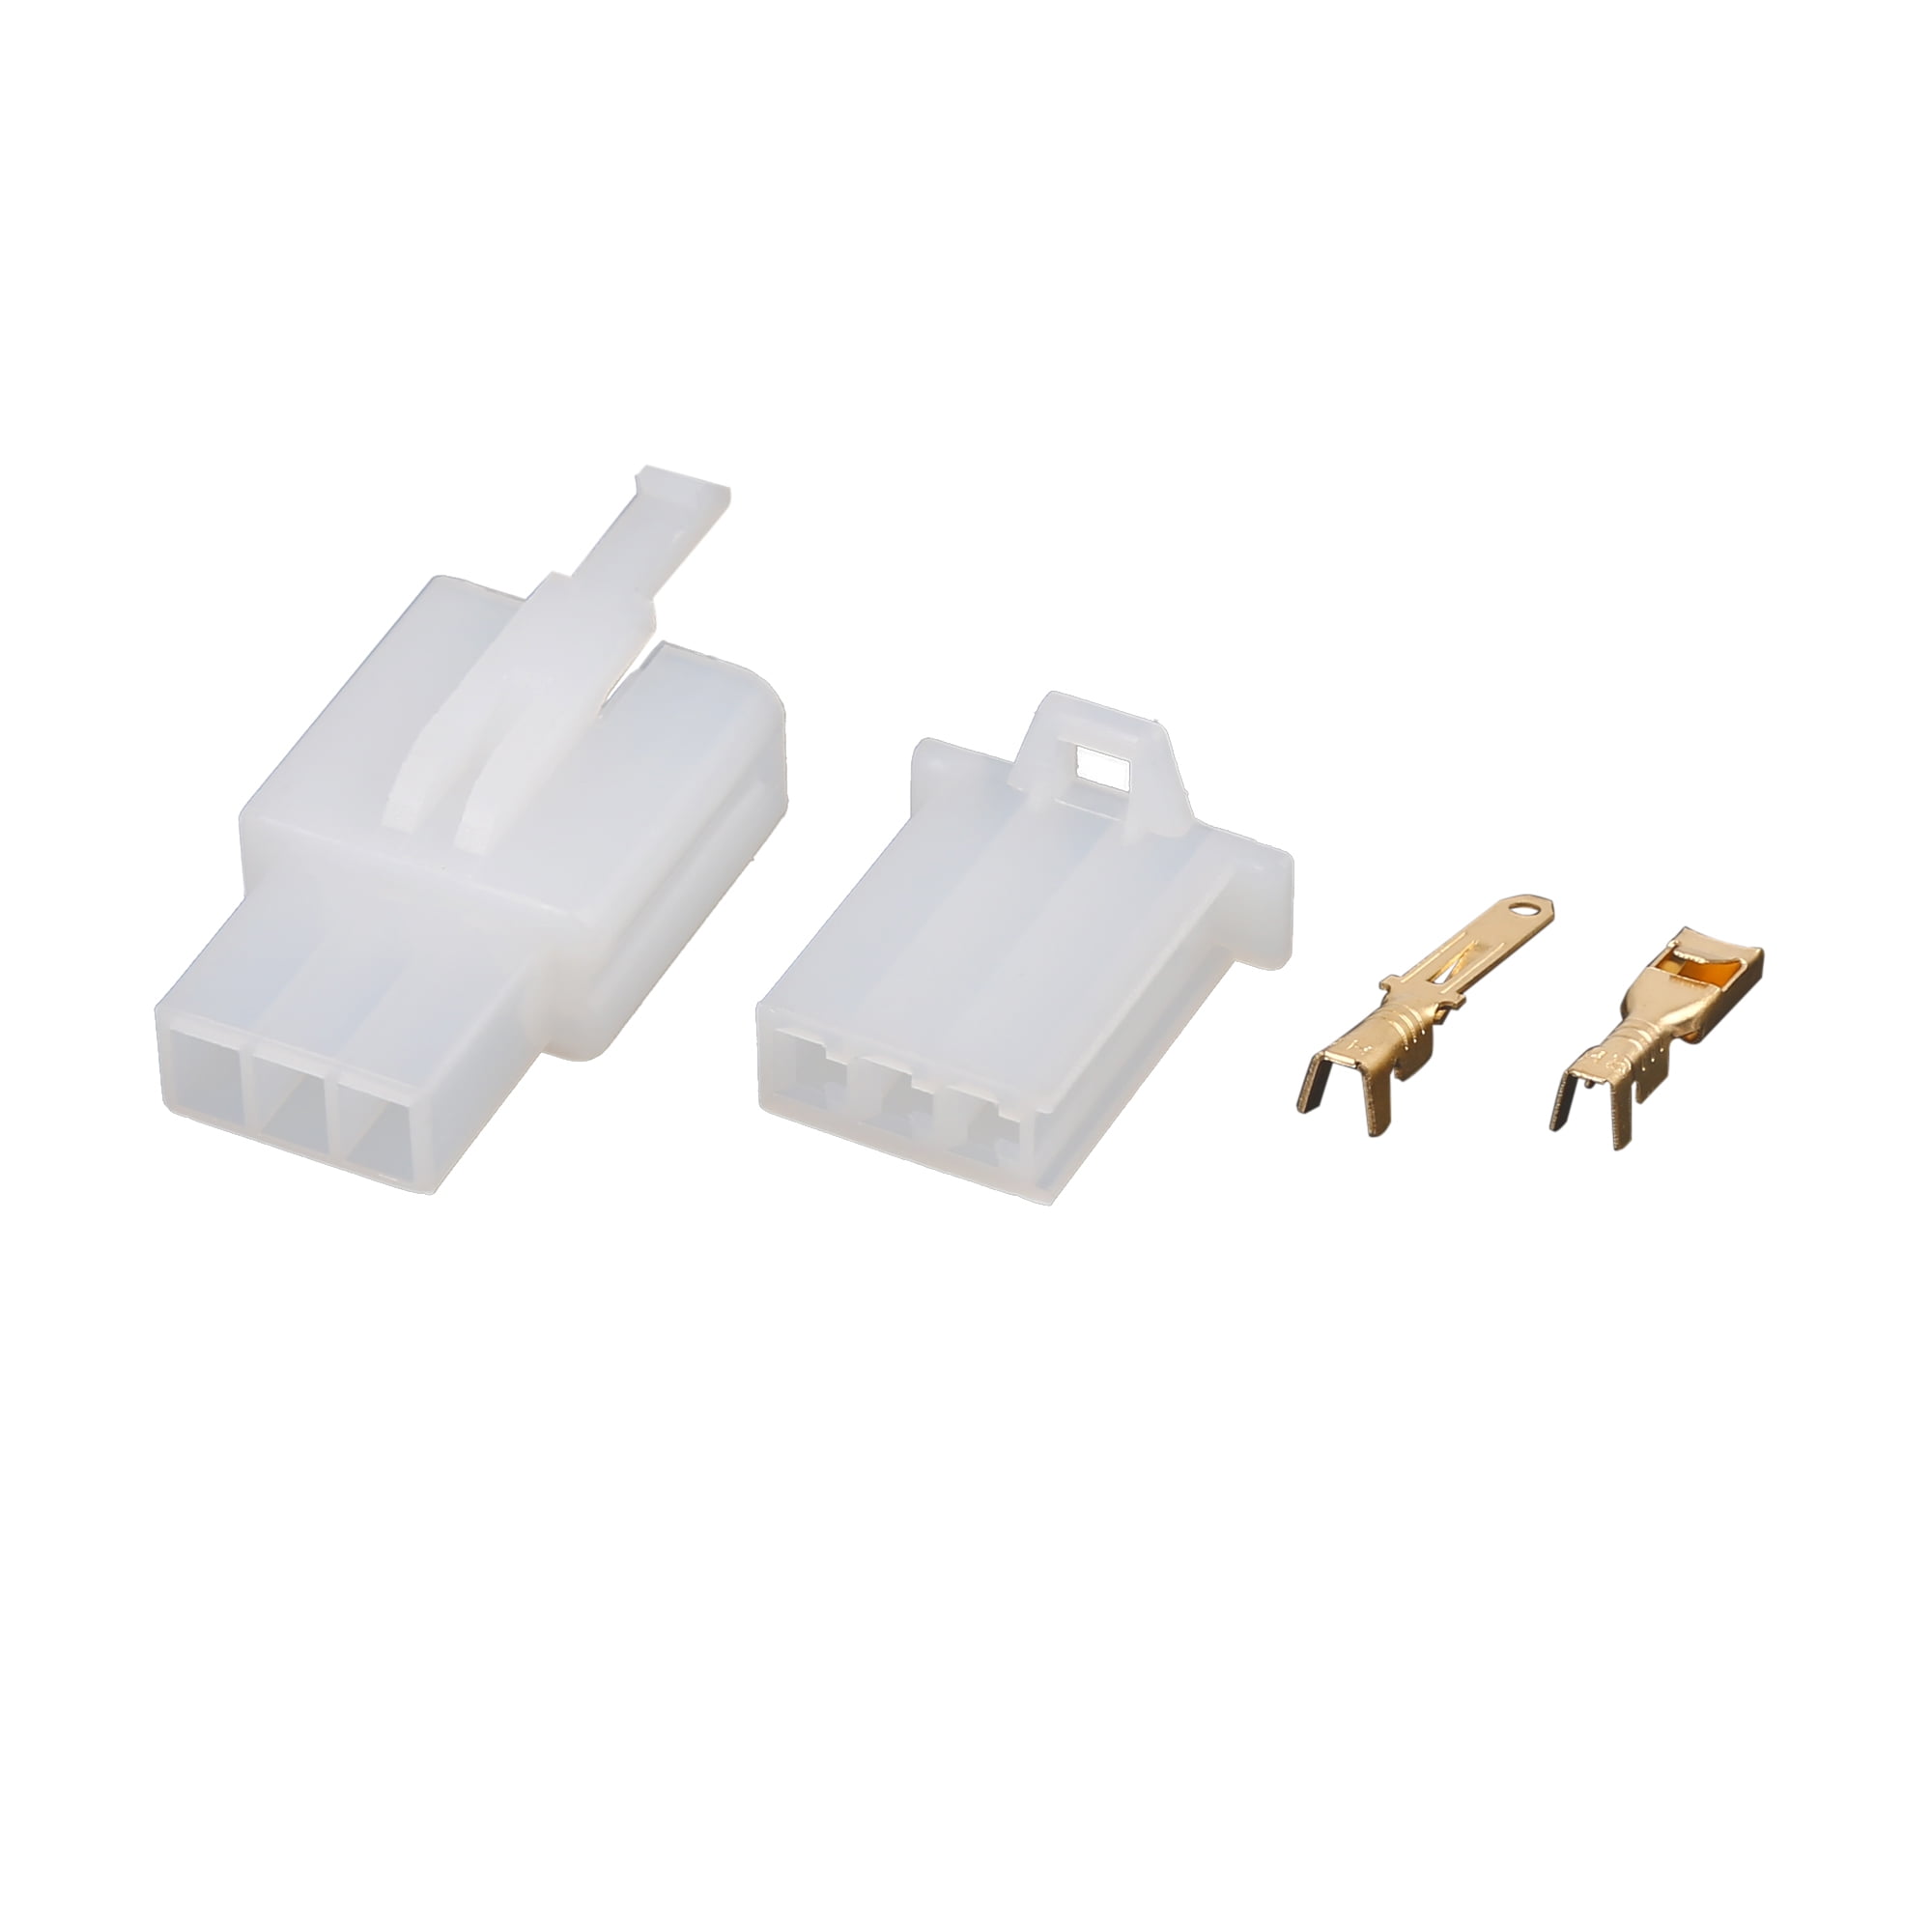 Motorcycle Battery Connectors Set 2-Way Pins Male/Female Chargers Terminals Part 